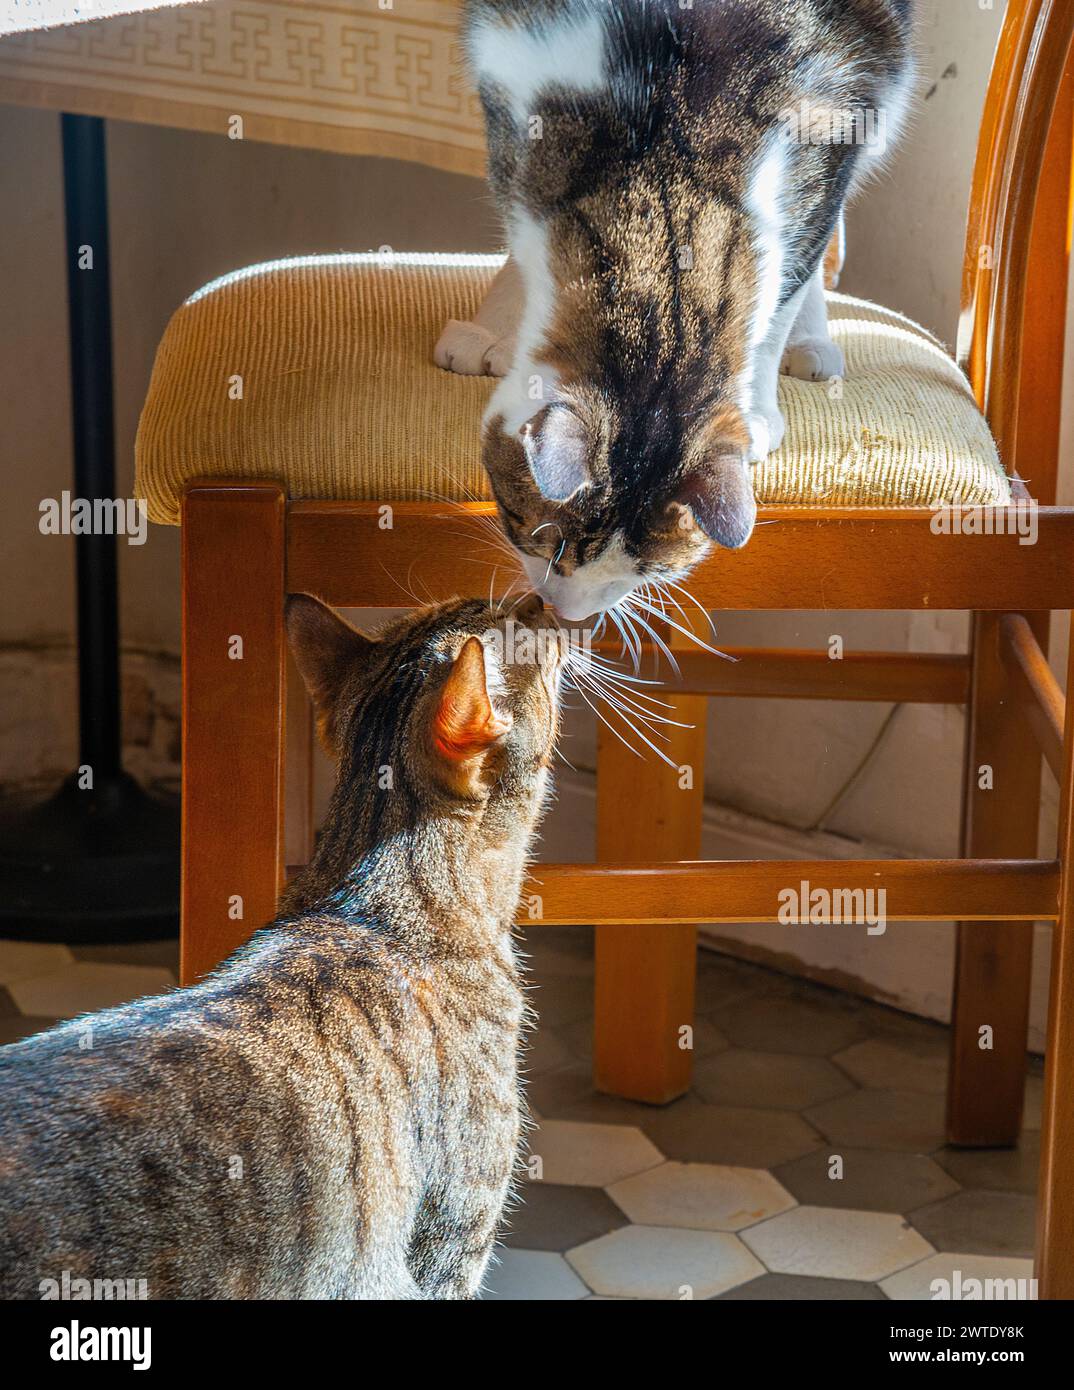 Two cats in contact. Stock Photo